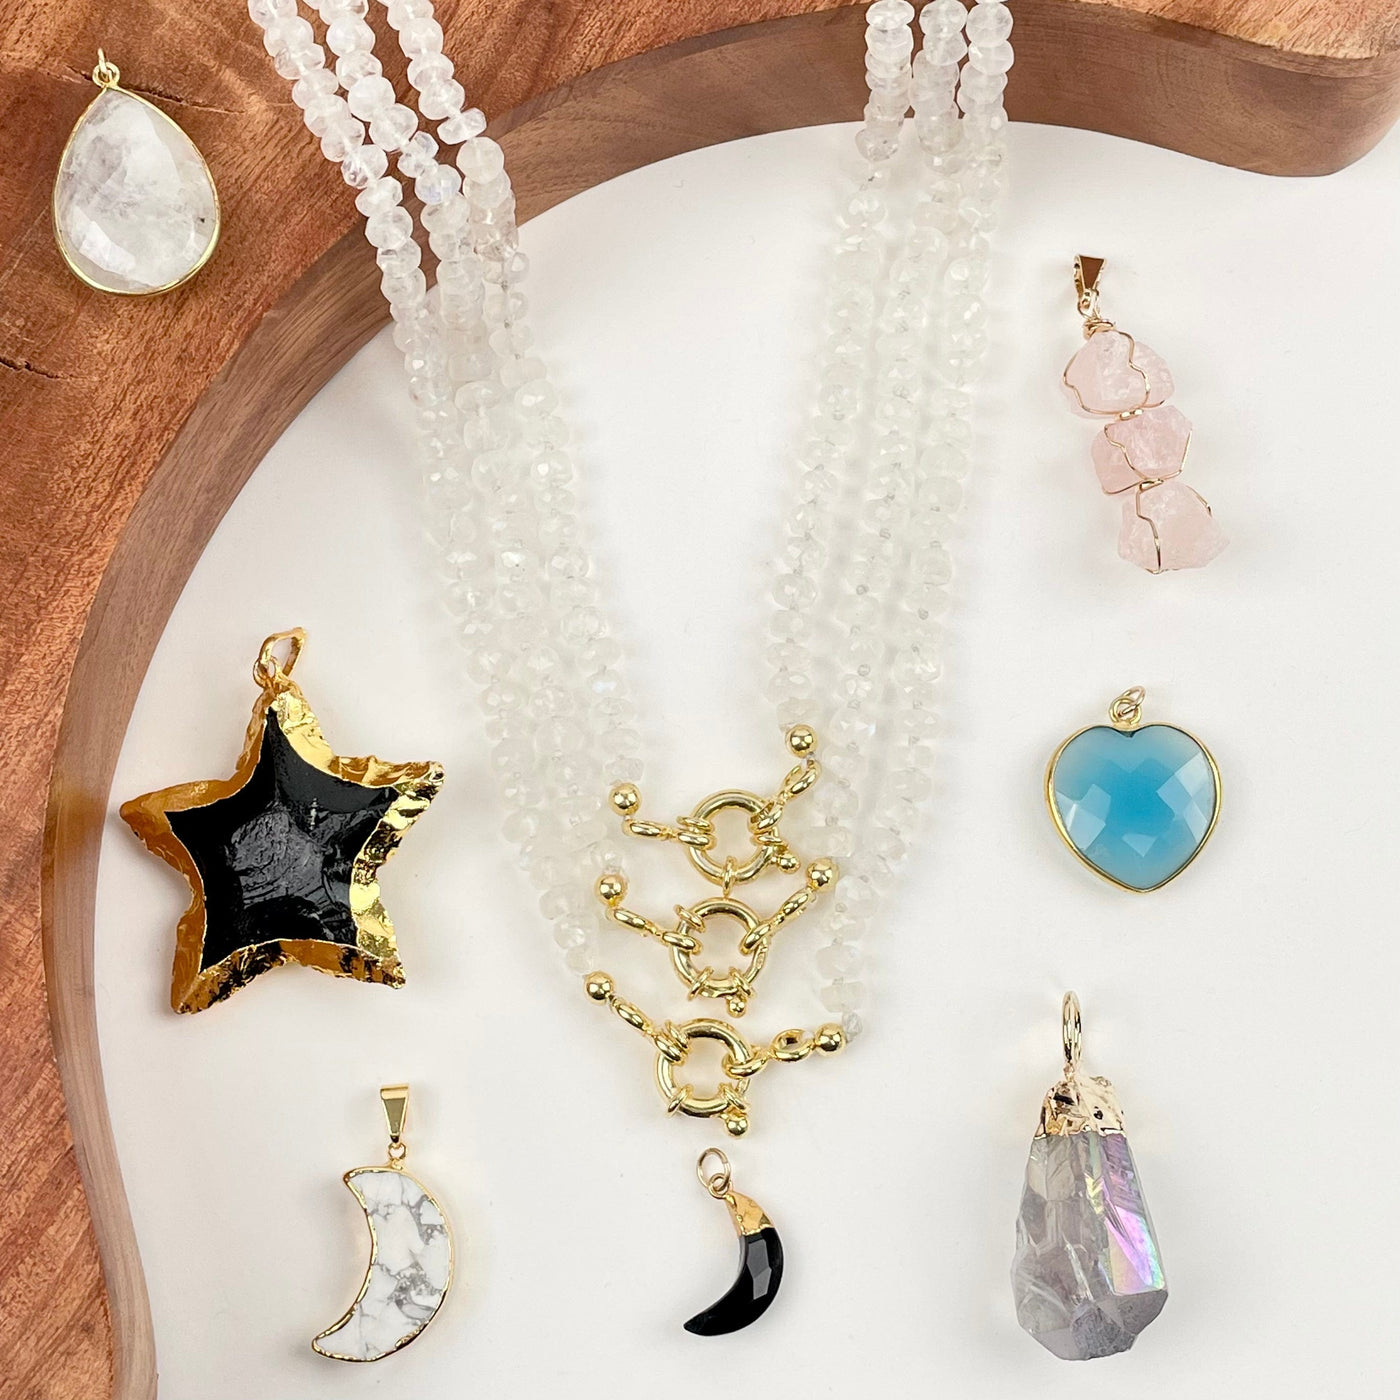 necklaces displayed with some candy necklace charms and pendants 